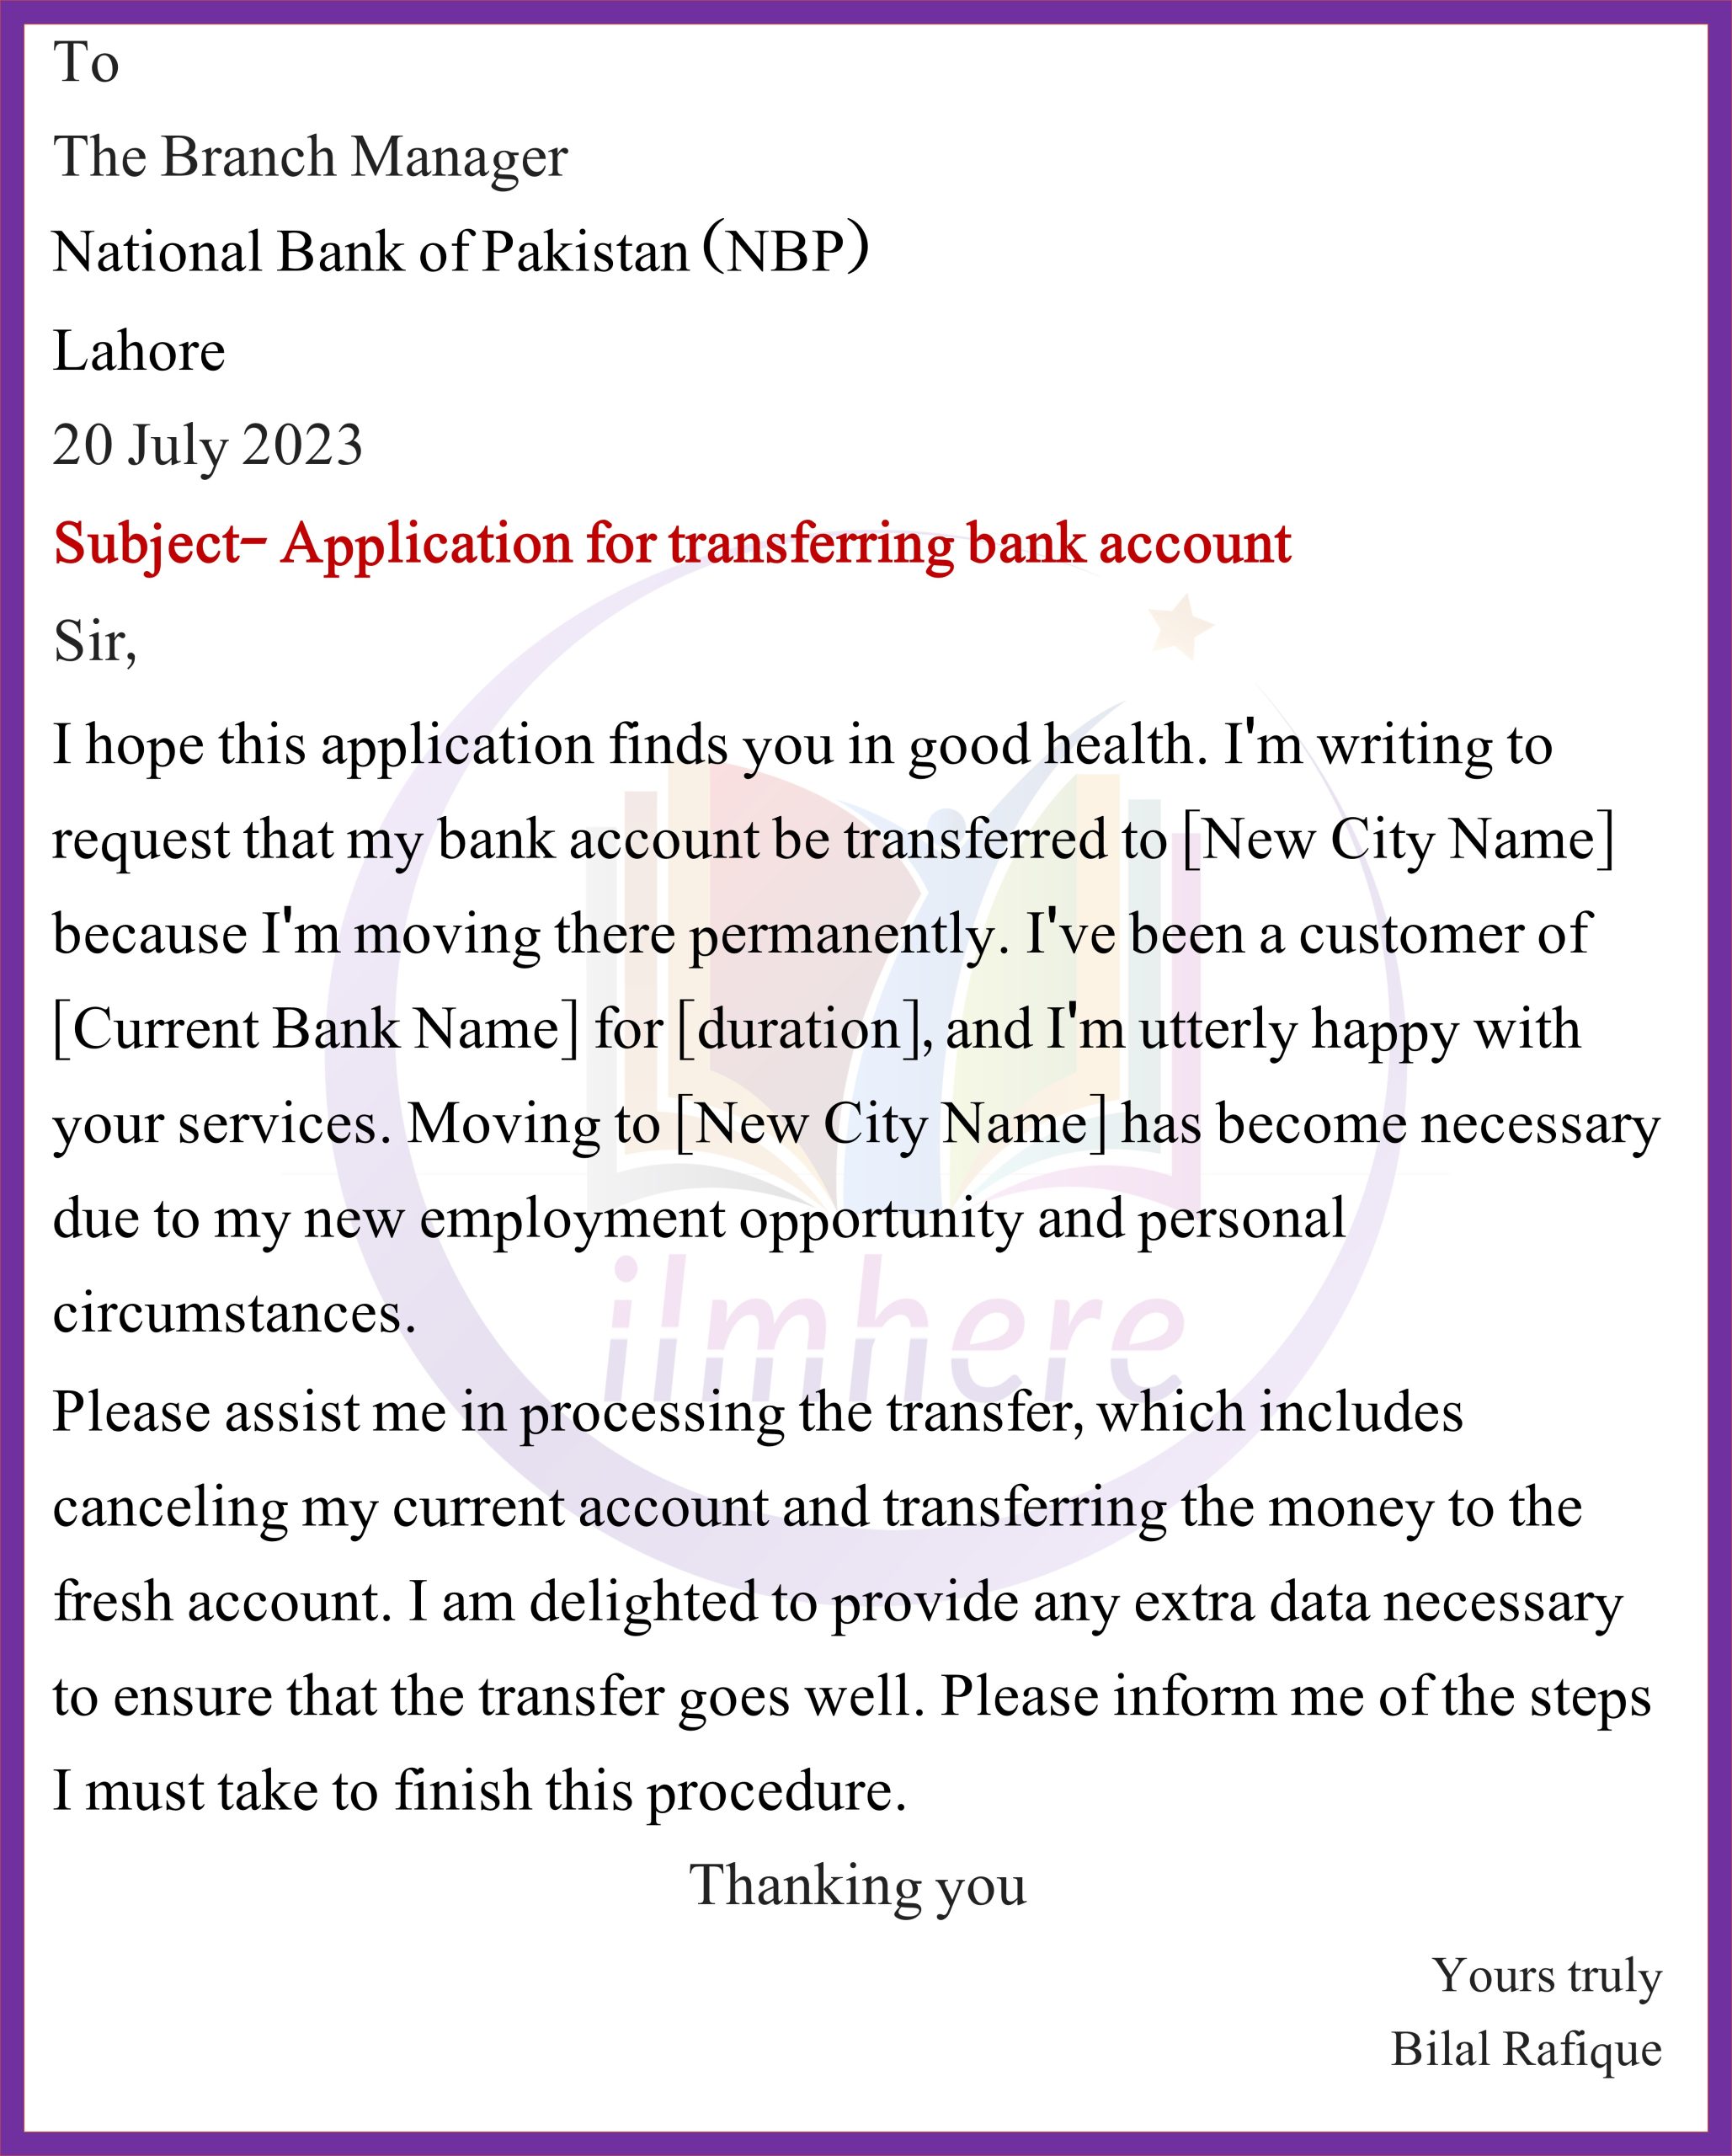 Application for transferring bank account